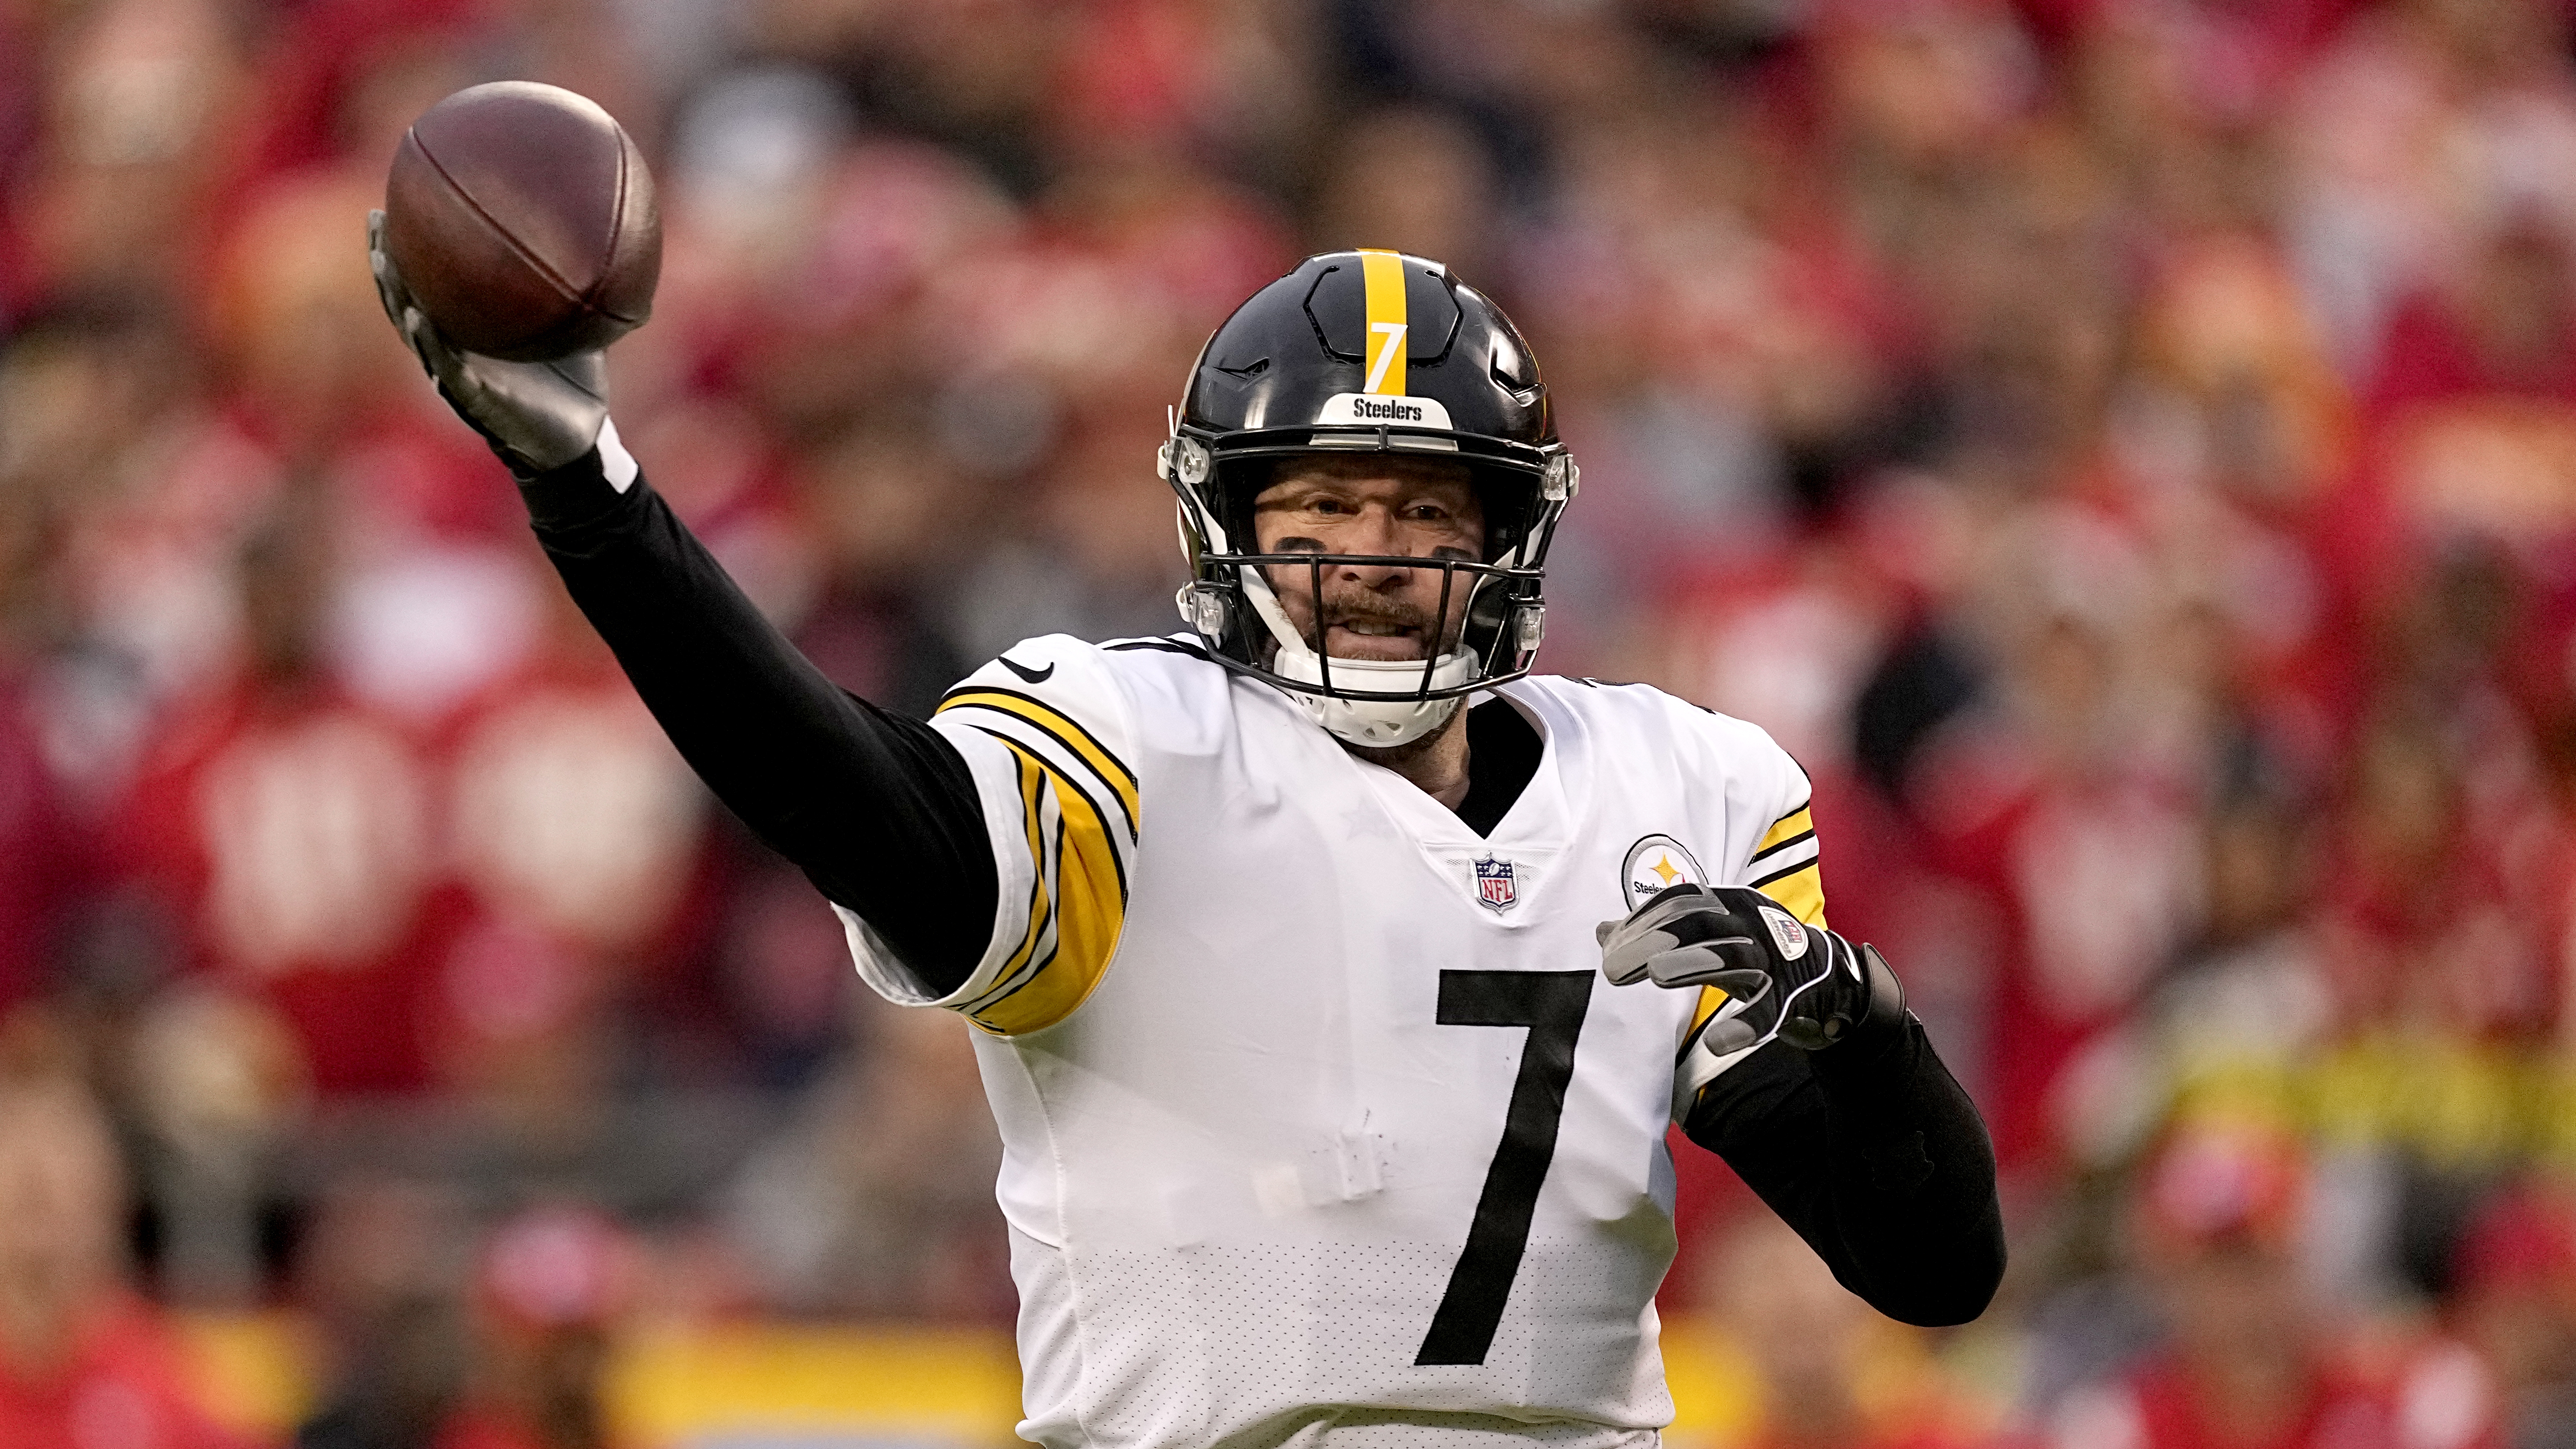 Ben Roethlisberger Hints at Retirement; Monday Could Be Final Steelers Home Game